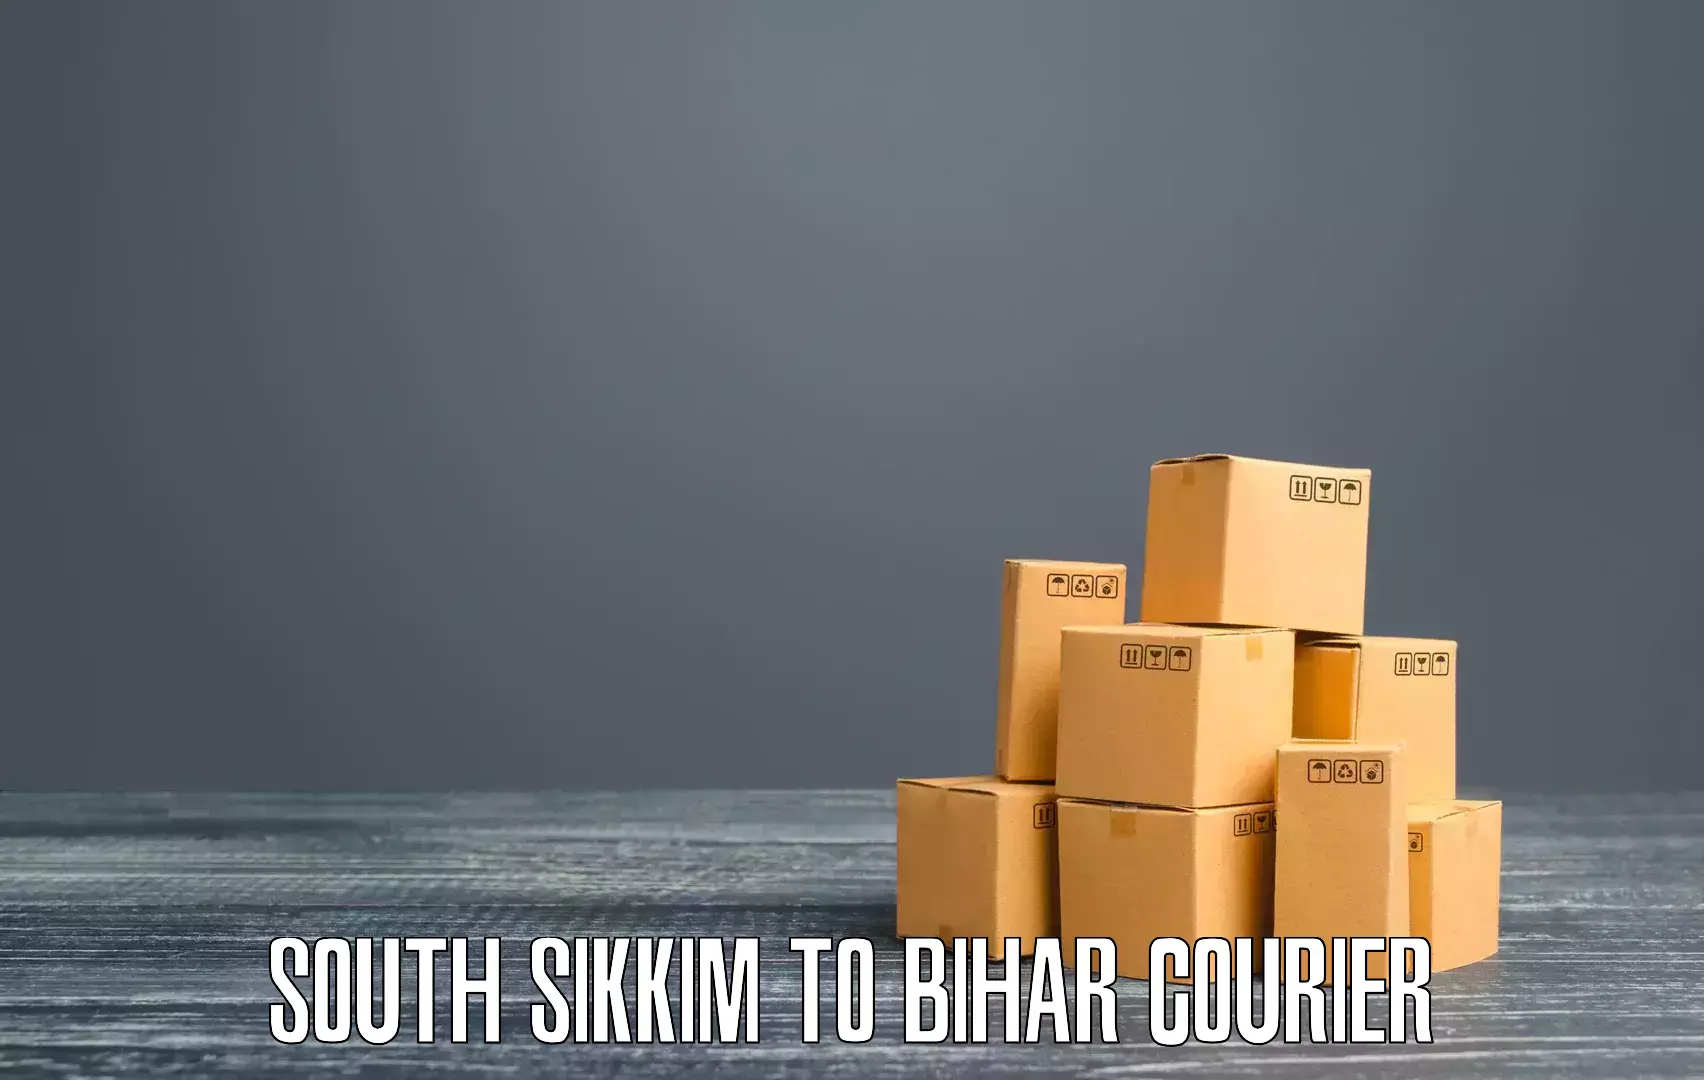 Commercial shipping rates in South Sikkim to Motipur